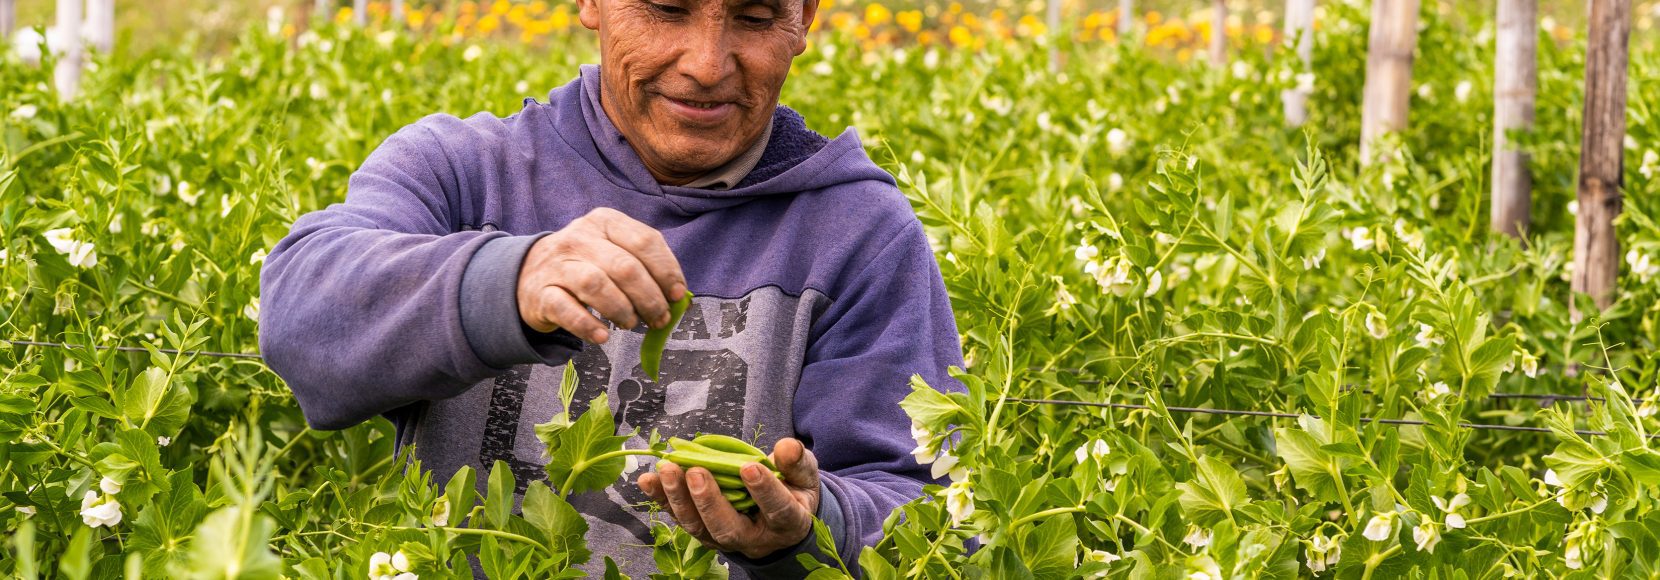 Climate change is impacting farmers in central america. Learn how in a new blog.